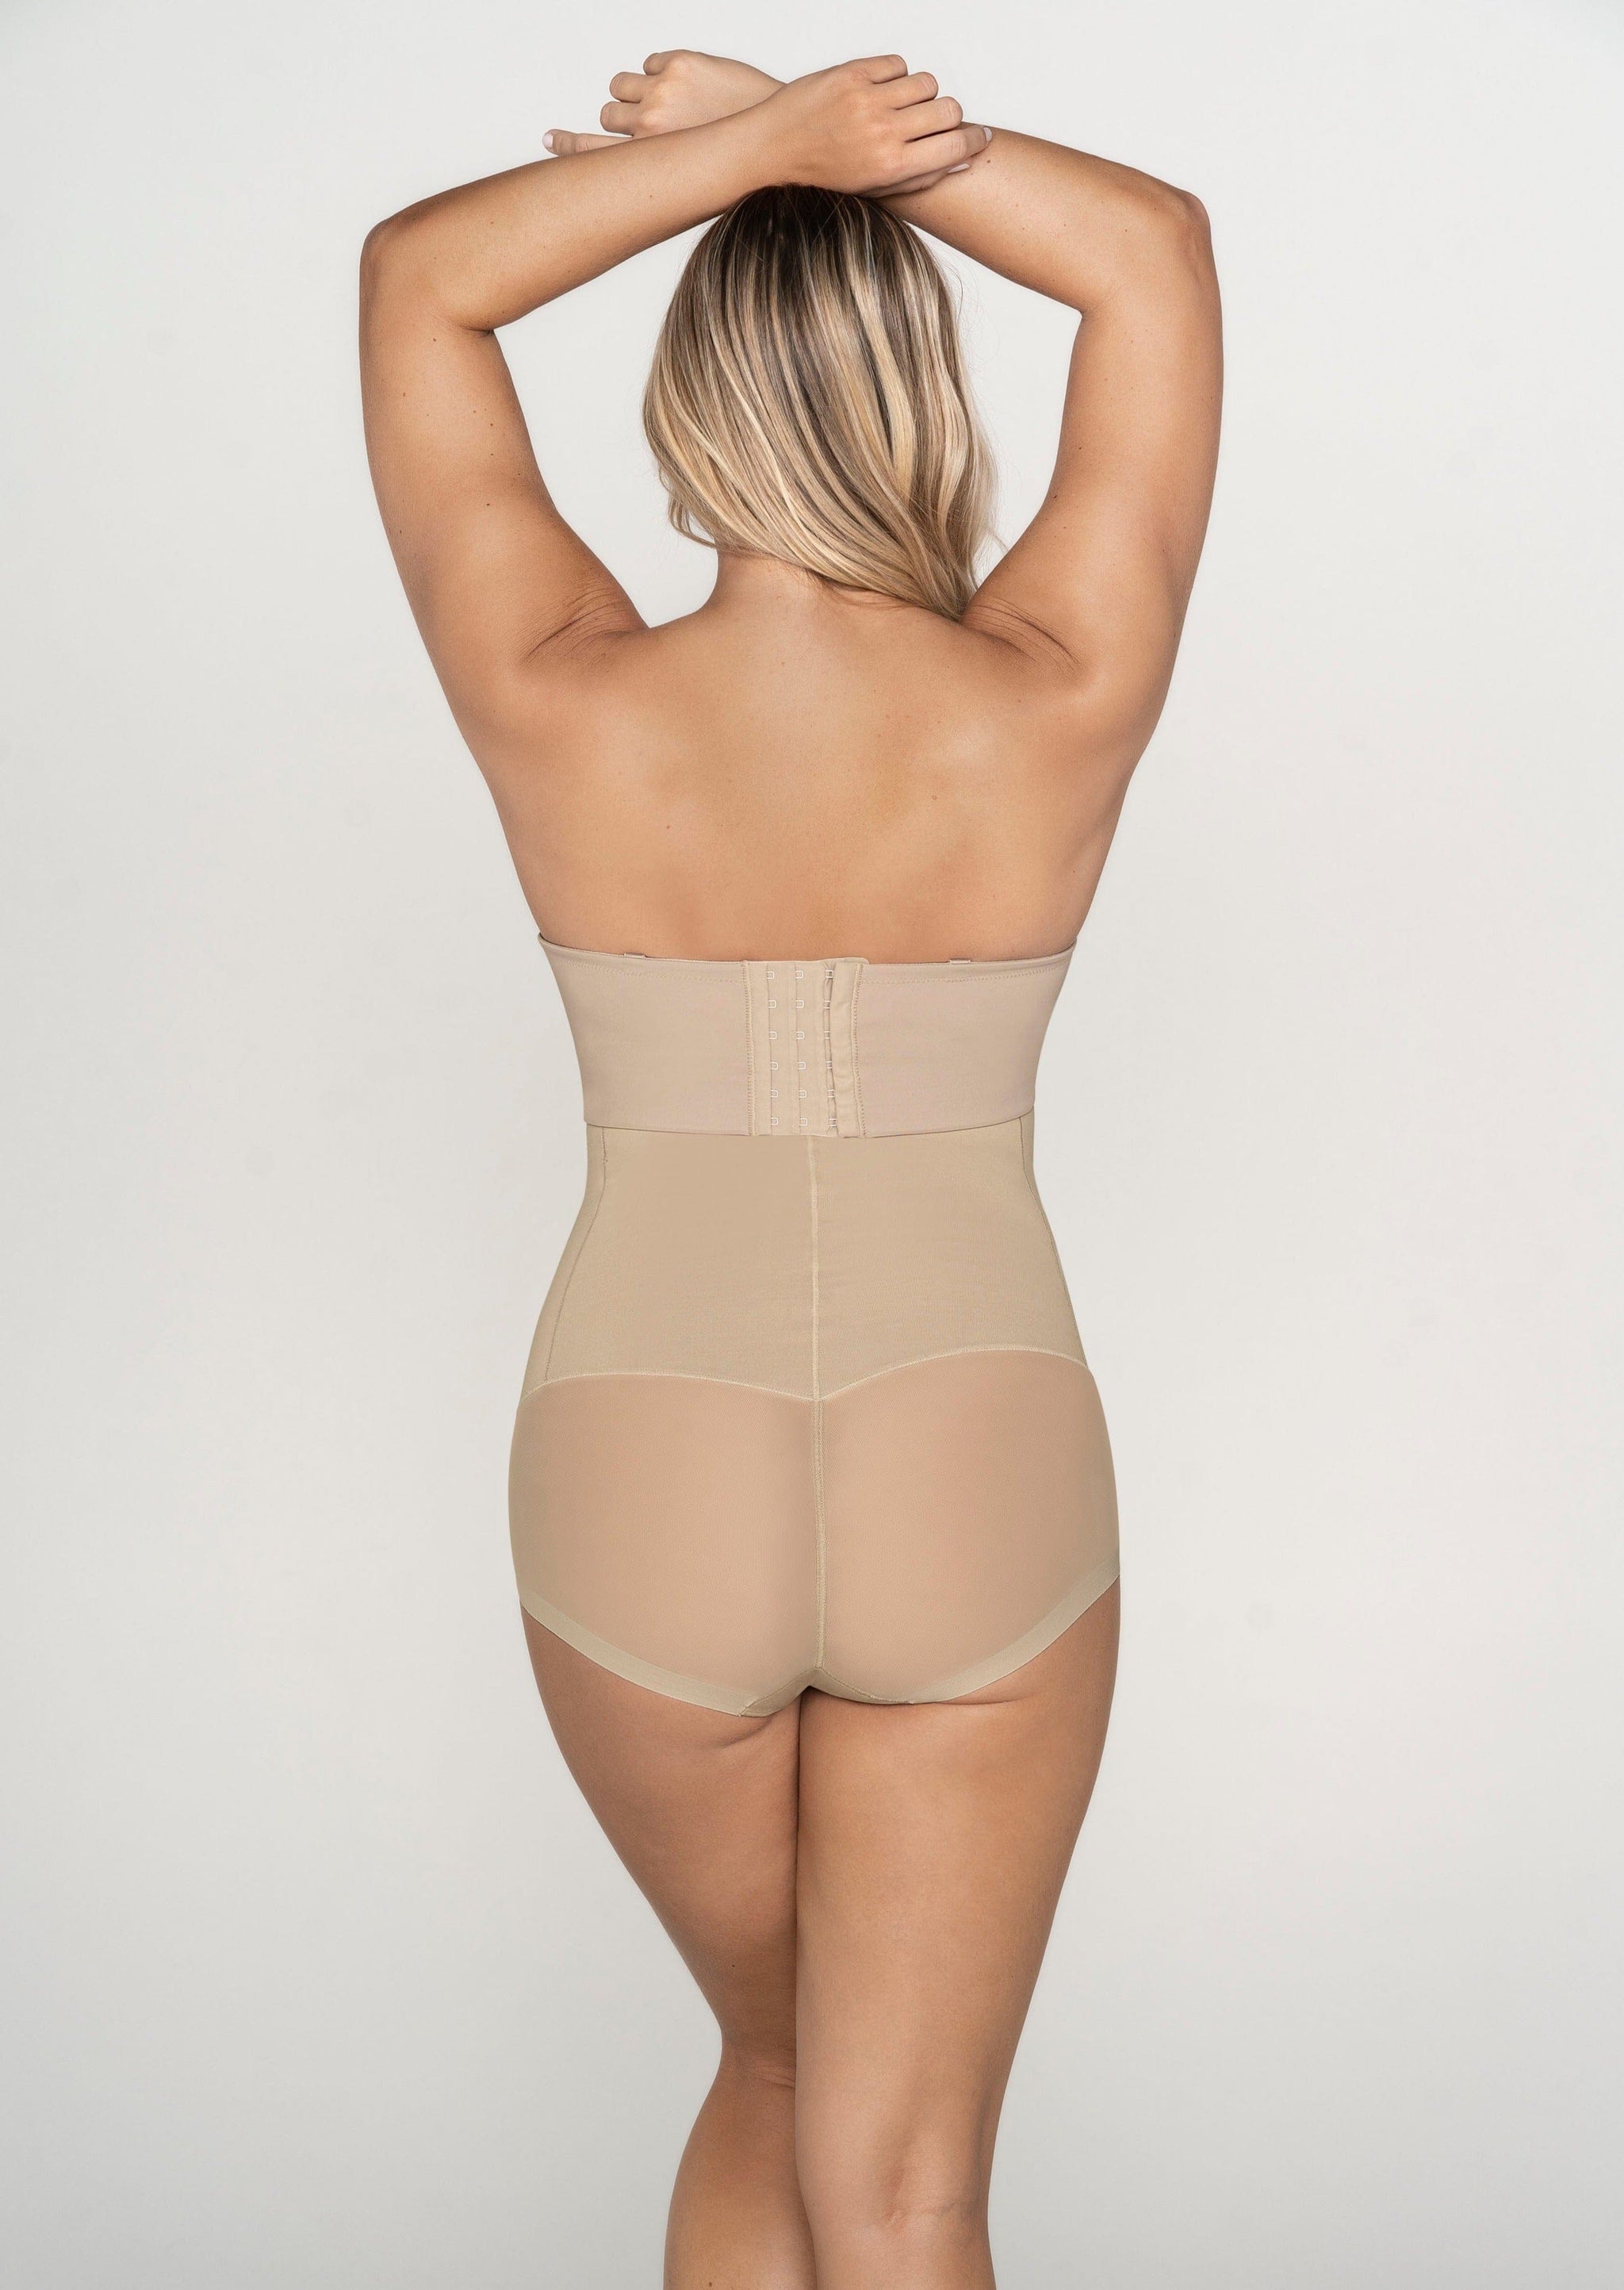 Invisible Effect Girdle with Extra Butt Lift Fajas Colombians